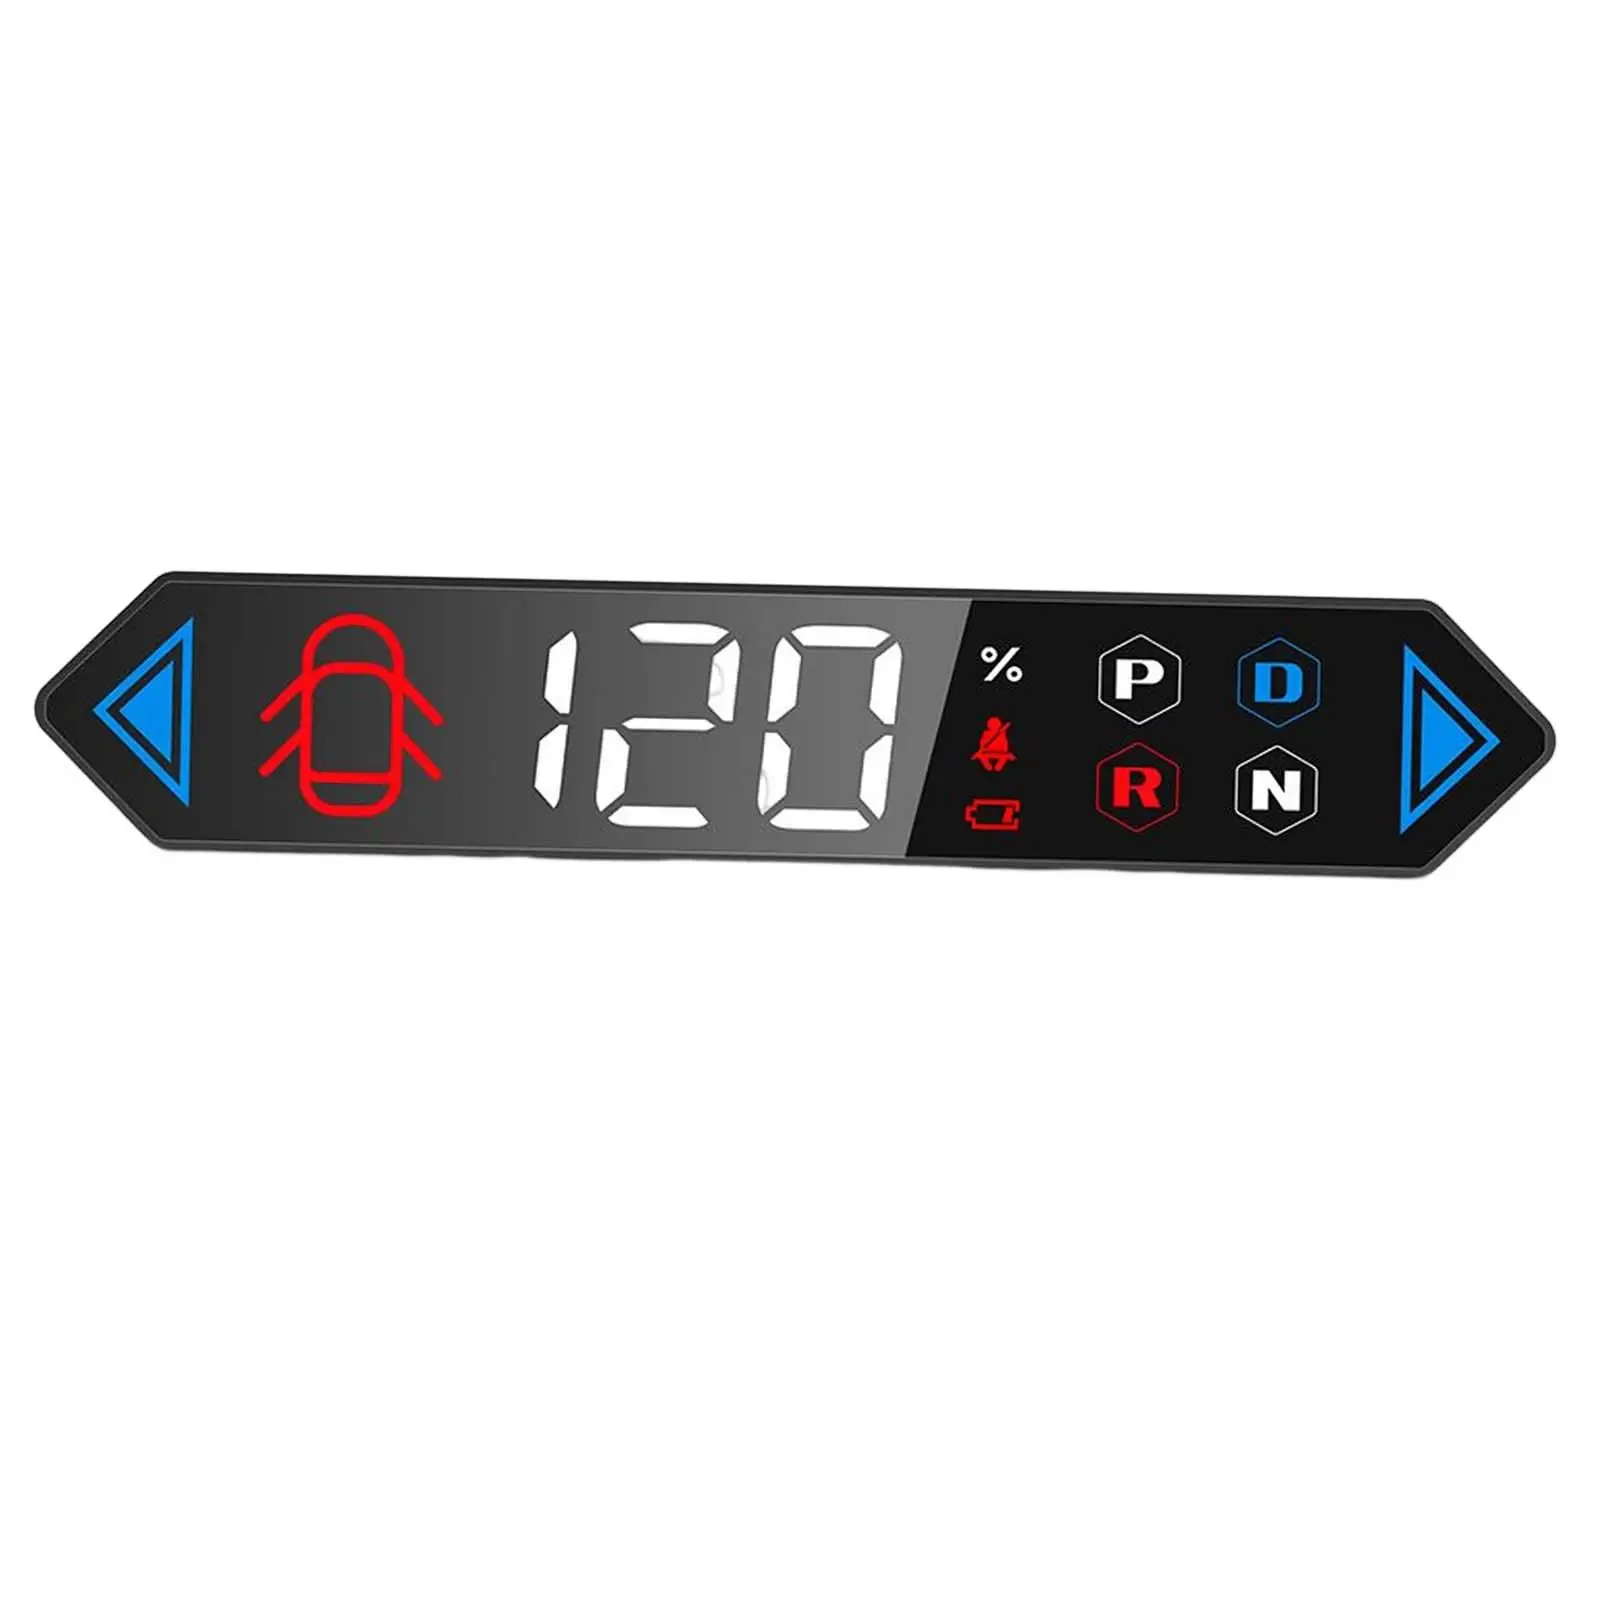 Embedded Design HUD Heads up Display Turn Signal for Tesla Model 3/Y Accessories